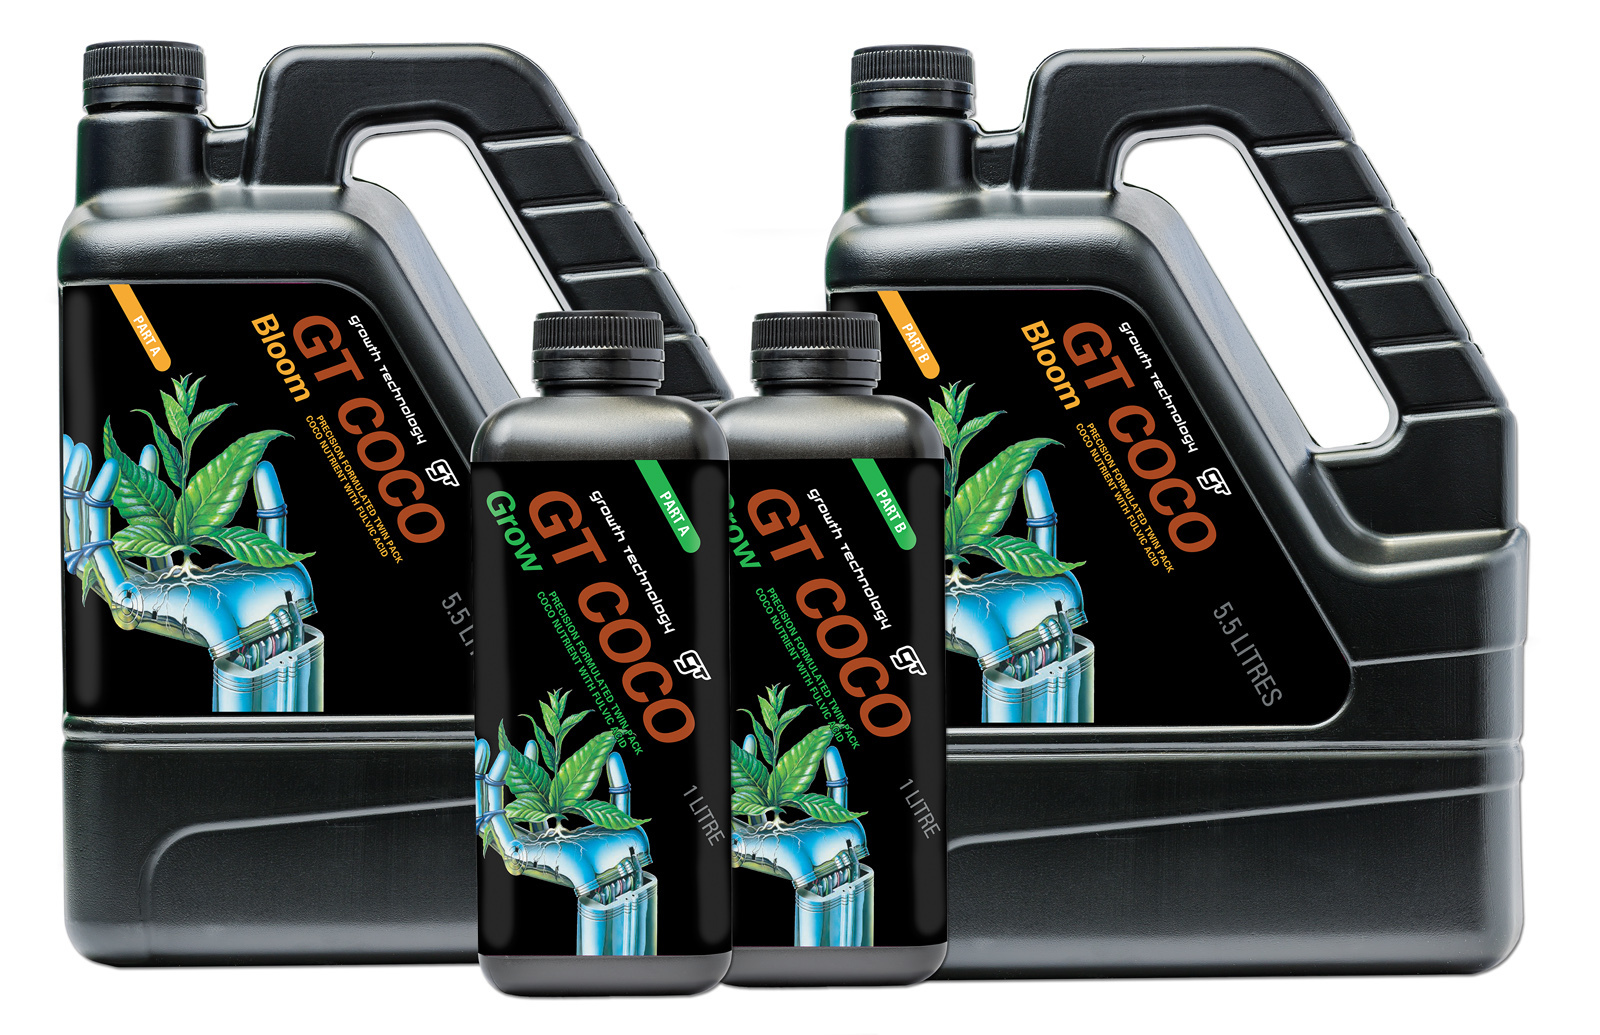 GT Coco Bloom 5+5Ltr = 10L set - Growth technology makers of Optimum Grow